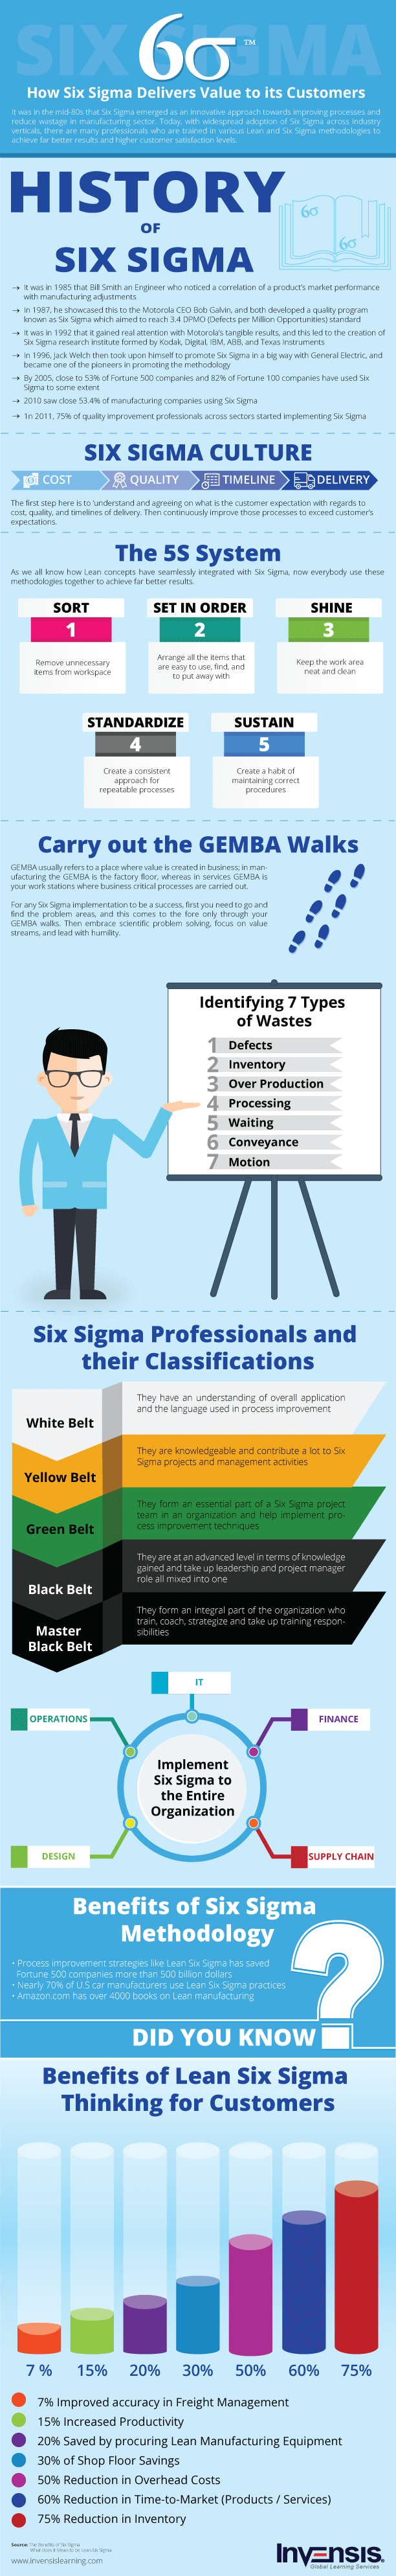 how-six-sigma-delivers-value-to-its-customers